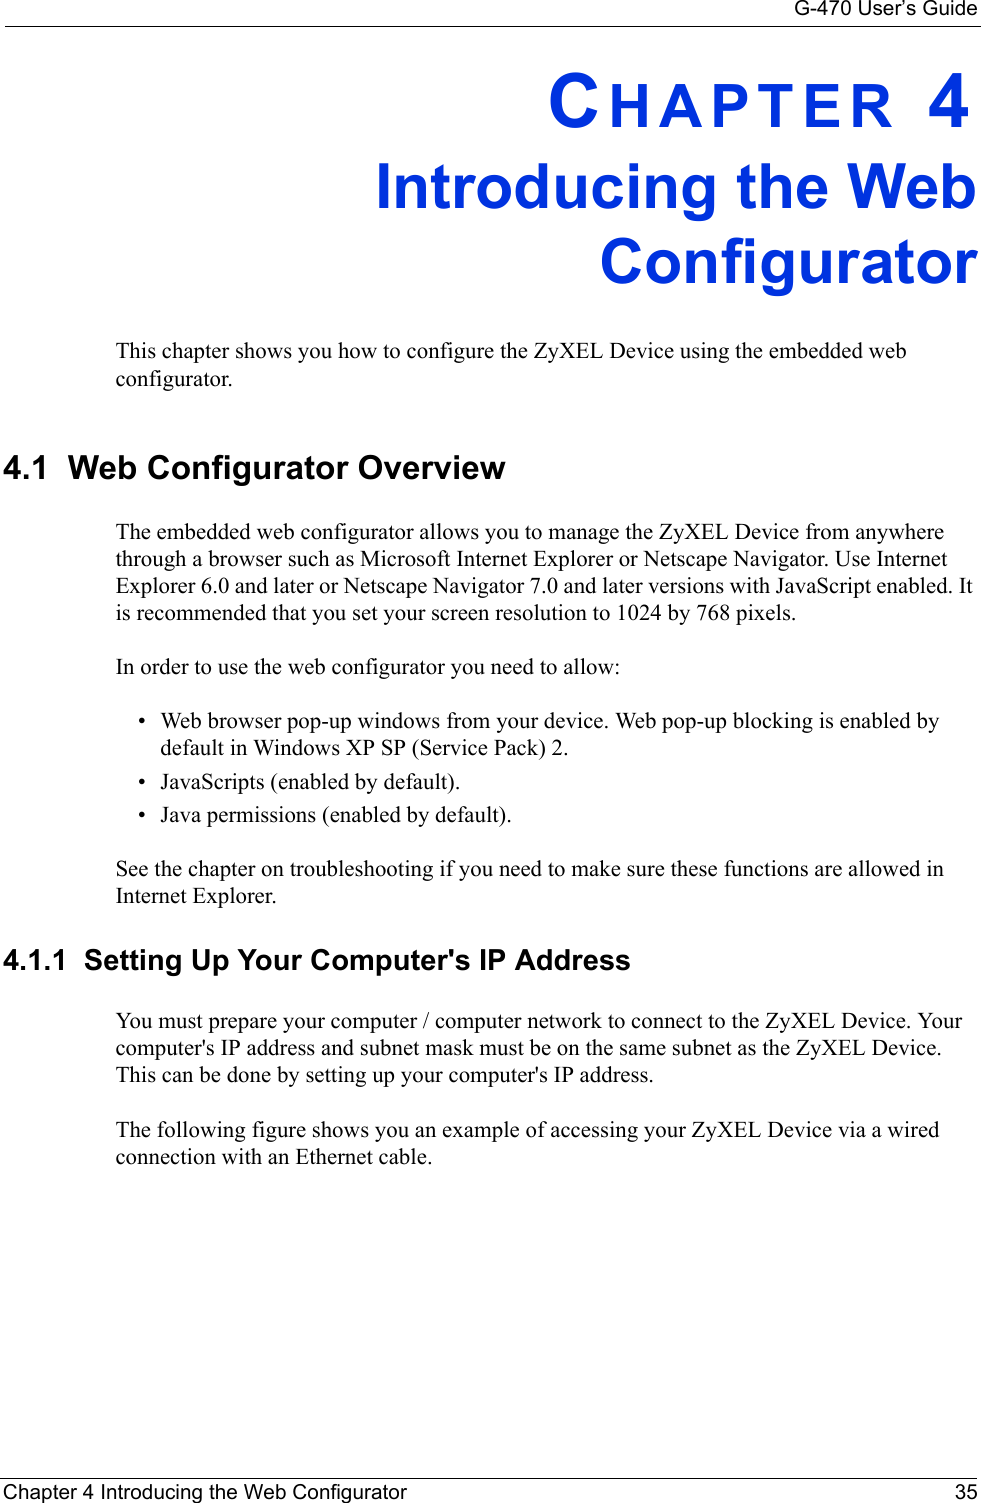 G-470 User’s GuideChapter 4 Introducing the Web Configurator 35CHAPTER 4Introducing the WebConfiguratorThis chapter shows you how to configure the ZyXEL Device using the embedded web configurator.4.1  Web Configurator OverviewThe embedded web configurator allows you to manage the ZyXEL Device from anywhere through a browser such as Microsoft Internet Explorer or Netscape Navigator. Use Internet Explorer 6.0 and later or Netscape Navigator 7.0 and later versions with JavaScript enabled. It is recommended that you set your screen resolution to 1024 by 768 pixels.In order to use the web configurator you need to allow:• Web browser pop-up windows from your device. Web pop-up blocking is enabled by default in Windows XP SP (Service Pack) 2.• JavaScripts (enabled by default).• Java permissions (enabled by default).See the chapter on troubleshooting if you need to make sure these functions are allowed in Internet Explorer.4.1.1  Setting Up Your Computer&apos;s IP AddressYou must prepare your computer / computer network to connect to the ZyXEL Device. Your computer&apos;s IP address and subnet mask must be on the same subnet as the ZyXEL Device. This can be done by setting up your computer&apos;s IP address. The following figure shows you an example of accessing your ZyXEL Device via a wired connection with an Ethernet cable.